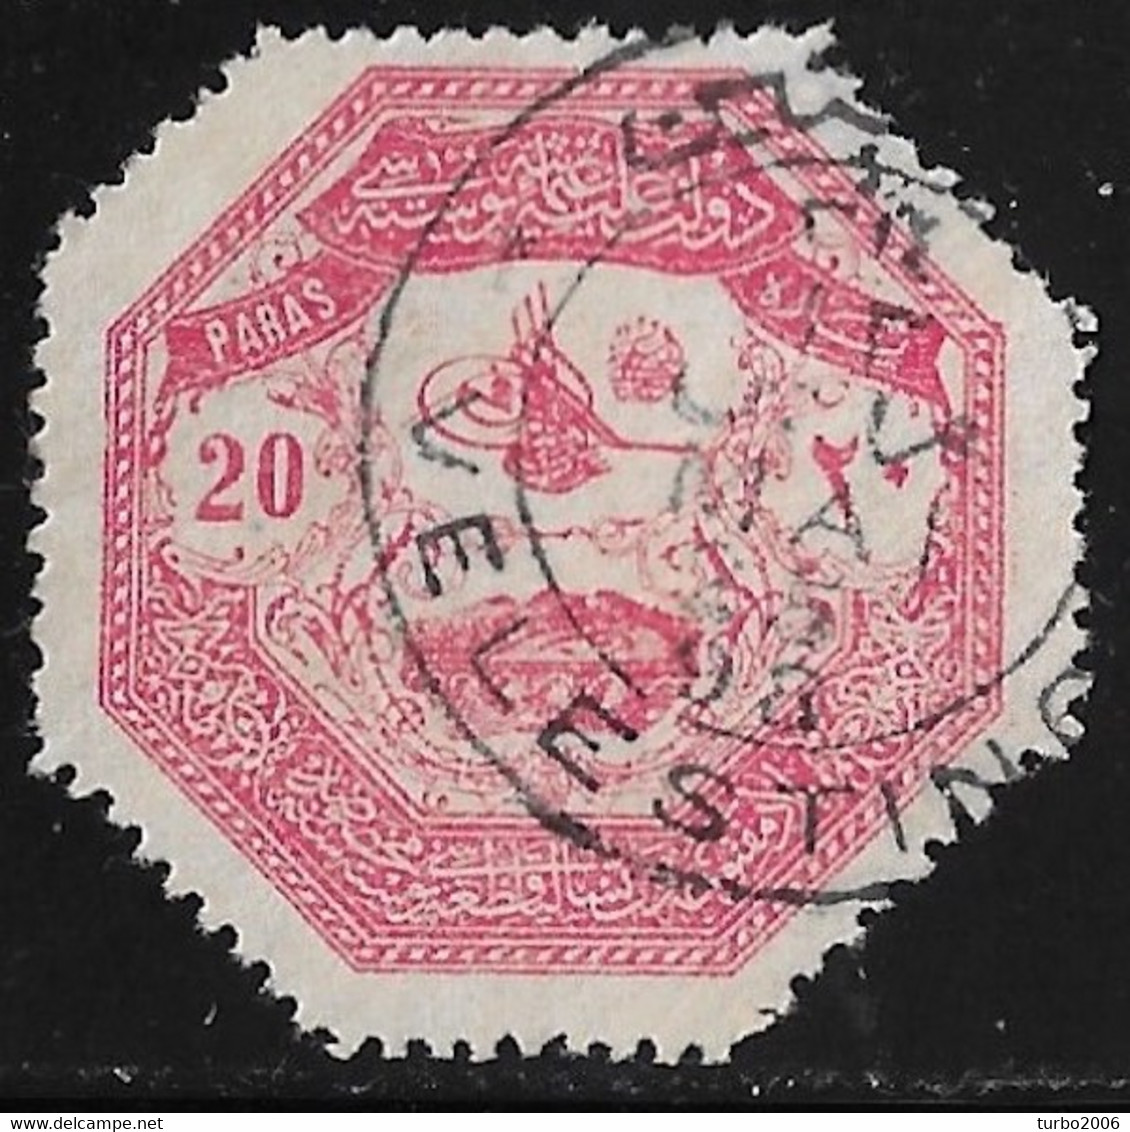 THESSALIA  1898 20 Pa Red Used VELESTINON By The Turkish Army Of Occupation During The Greek-Turkish War Of 1897 Vl. 2 - Thessalië